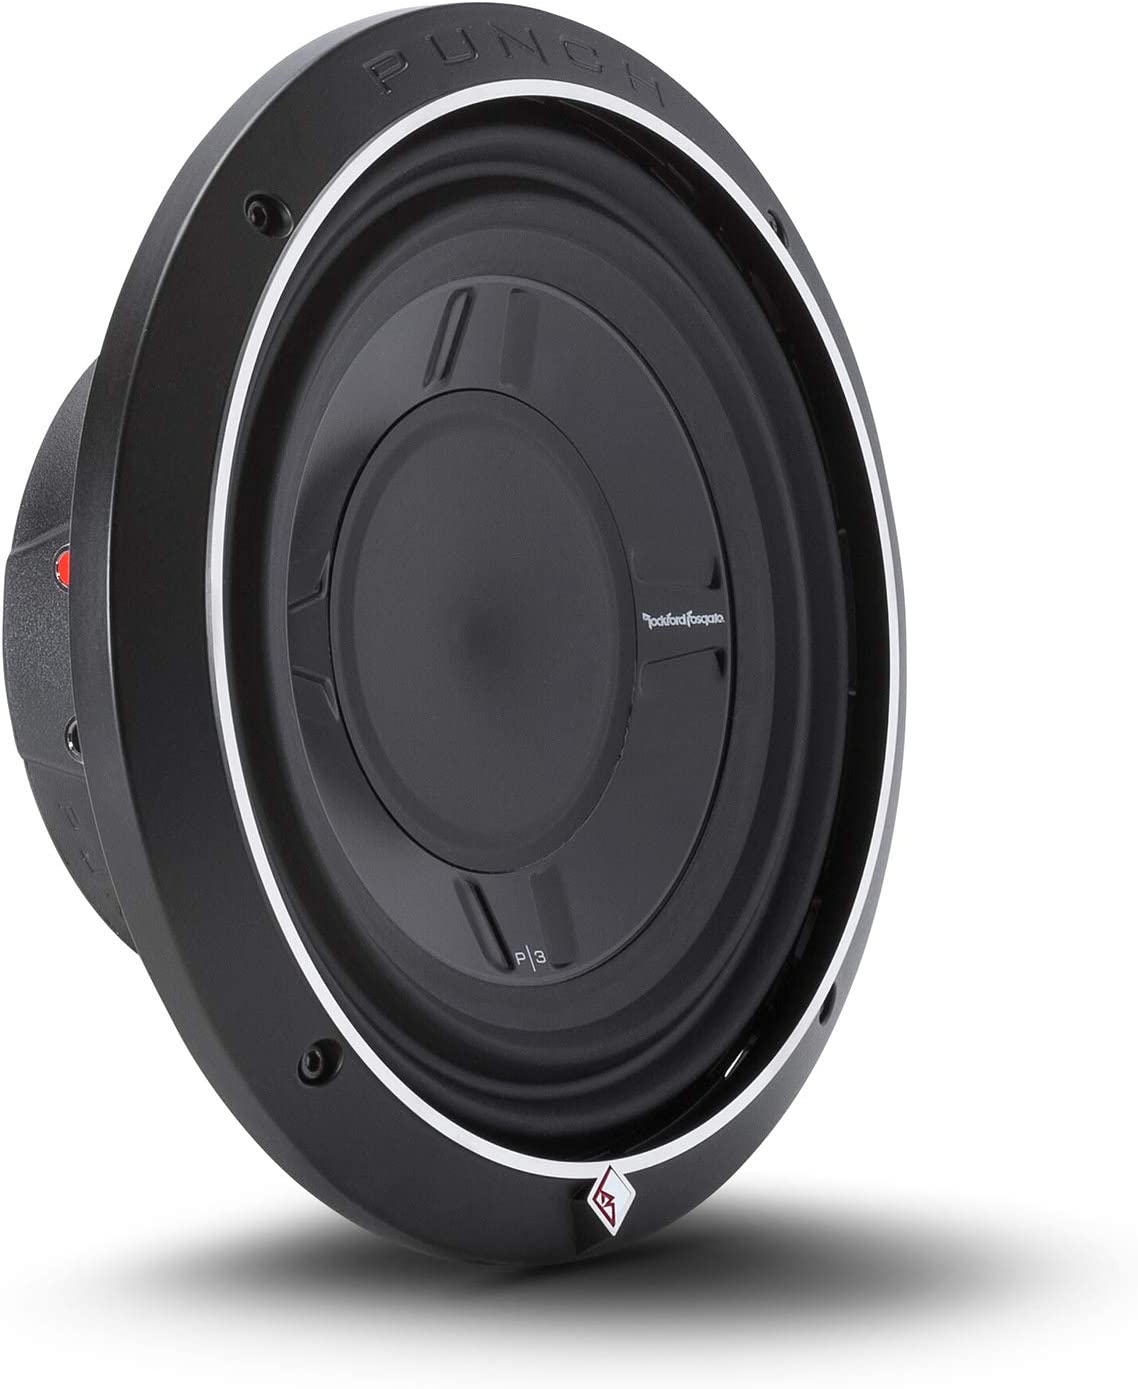 Rockford Fosgate P3SD2-10 1200W Shallow Mount Subwoofers